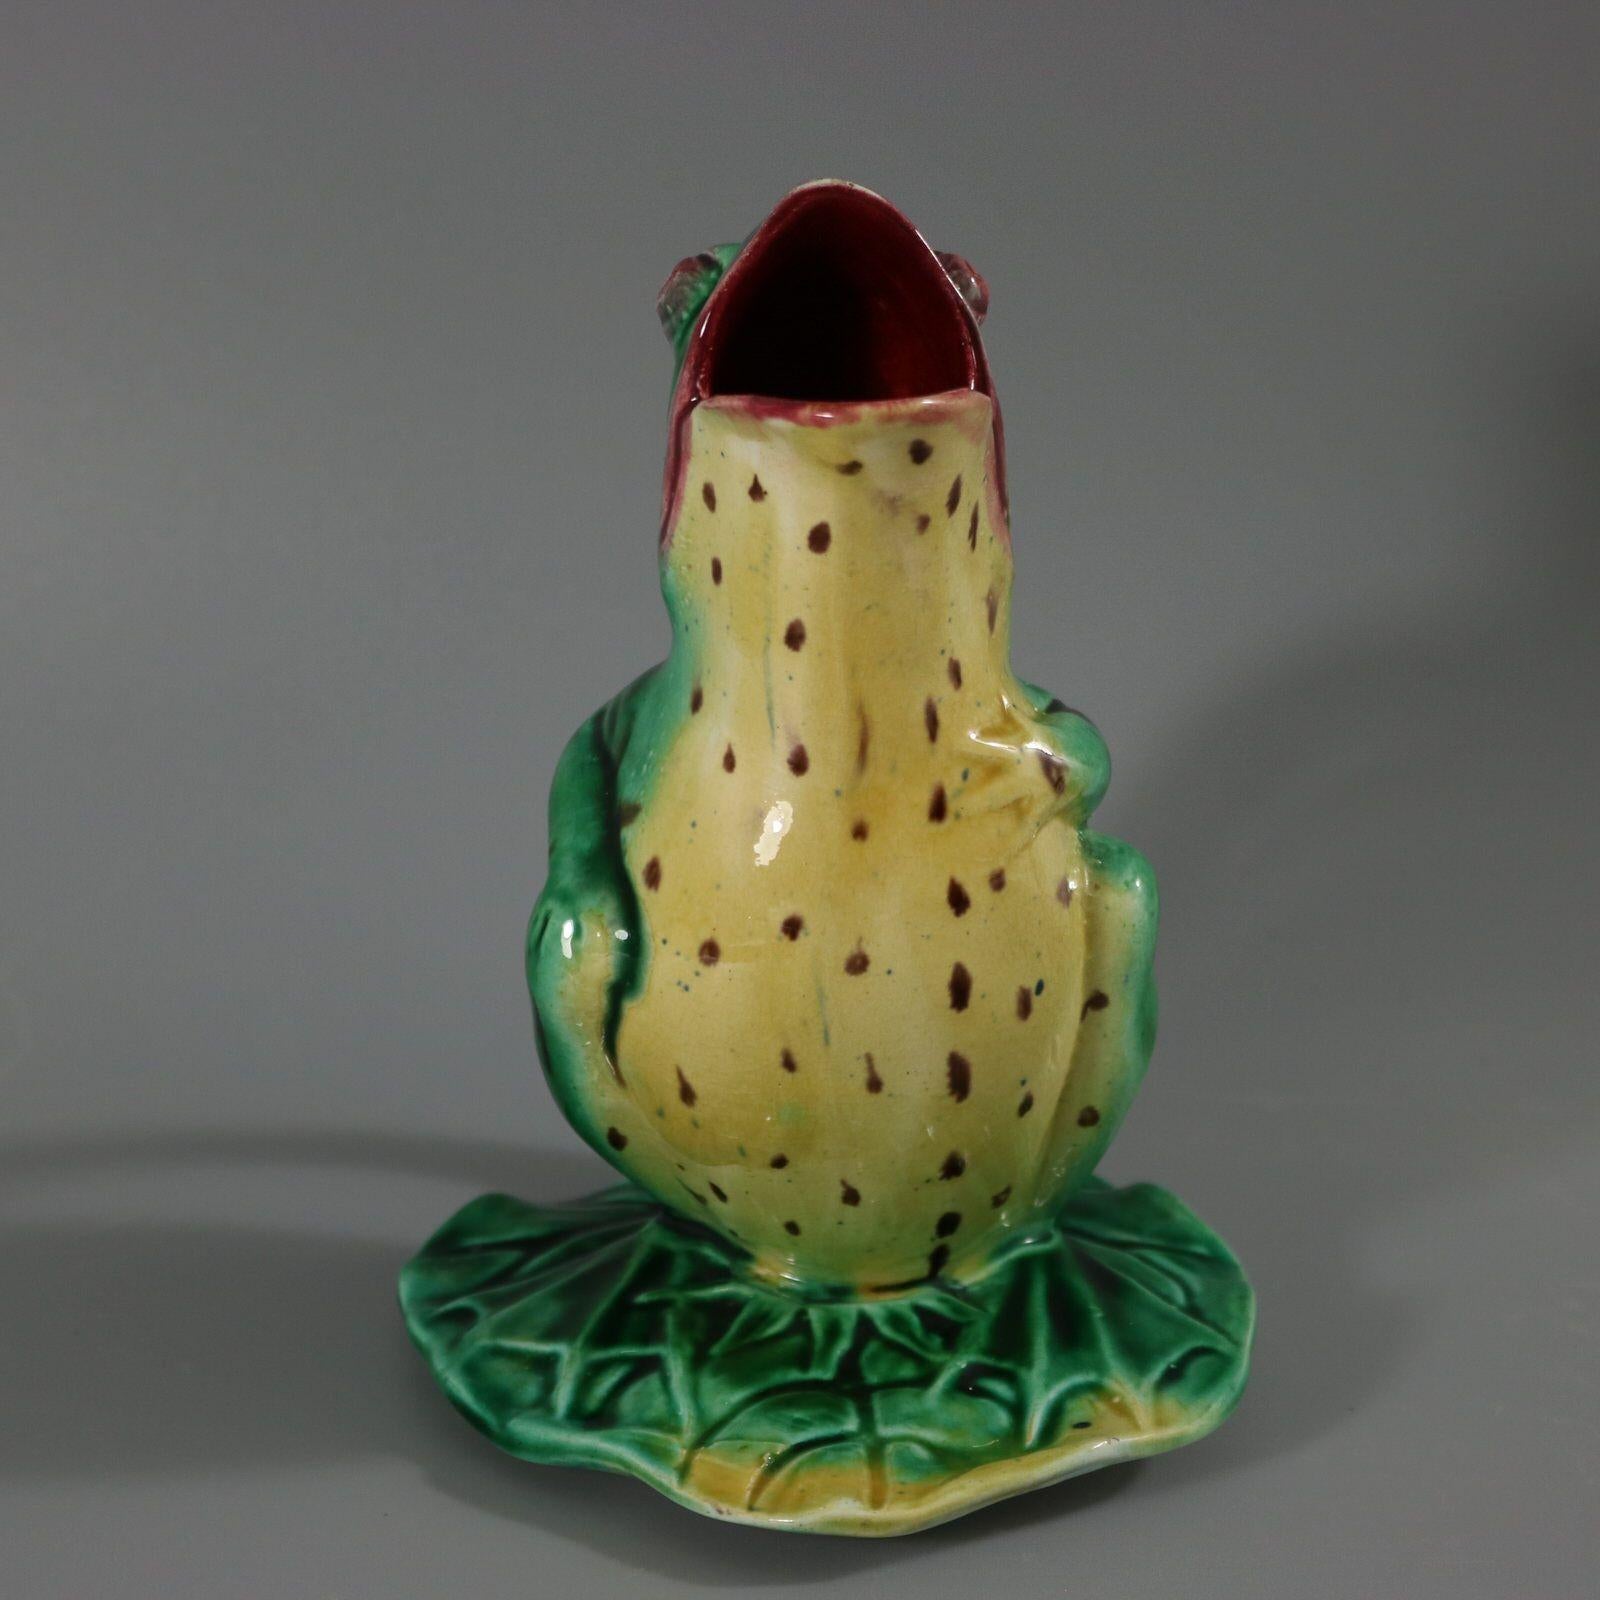 Majolica jug/pitcher which features a frog sitting on a lily pad. Colouration: green, yellow, brown, are predominant. Bears a pattern number, '3'.